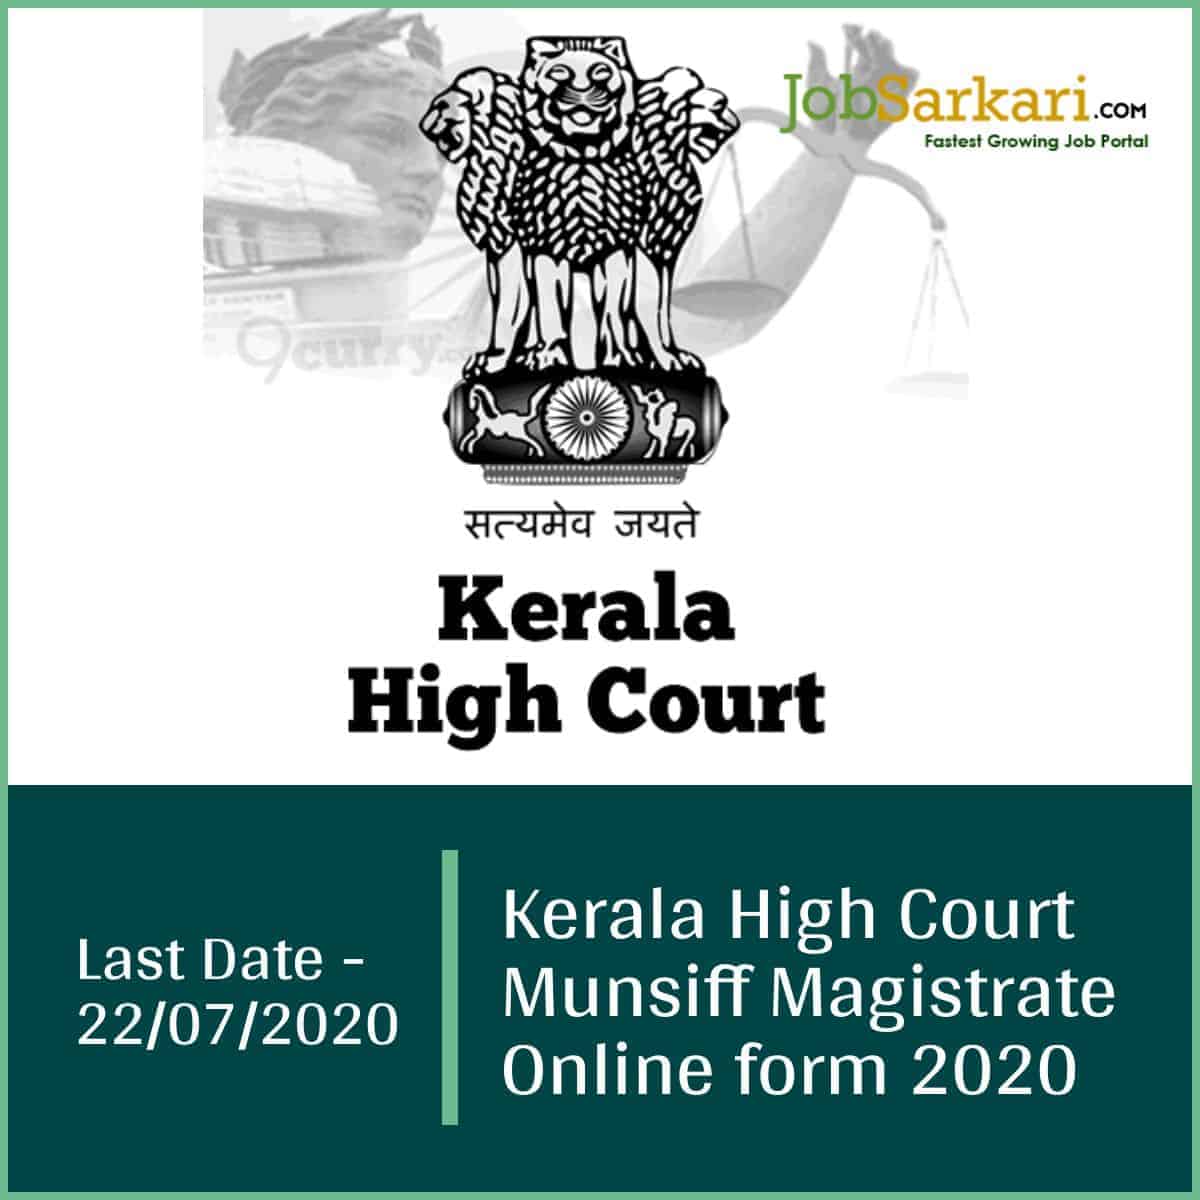 Kerala High Court Munsiff Magistrate Online form 2020